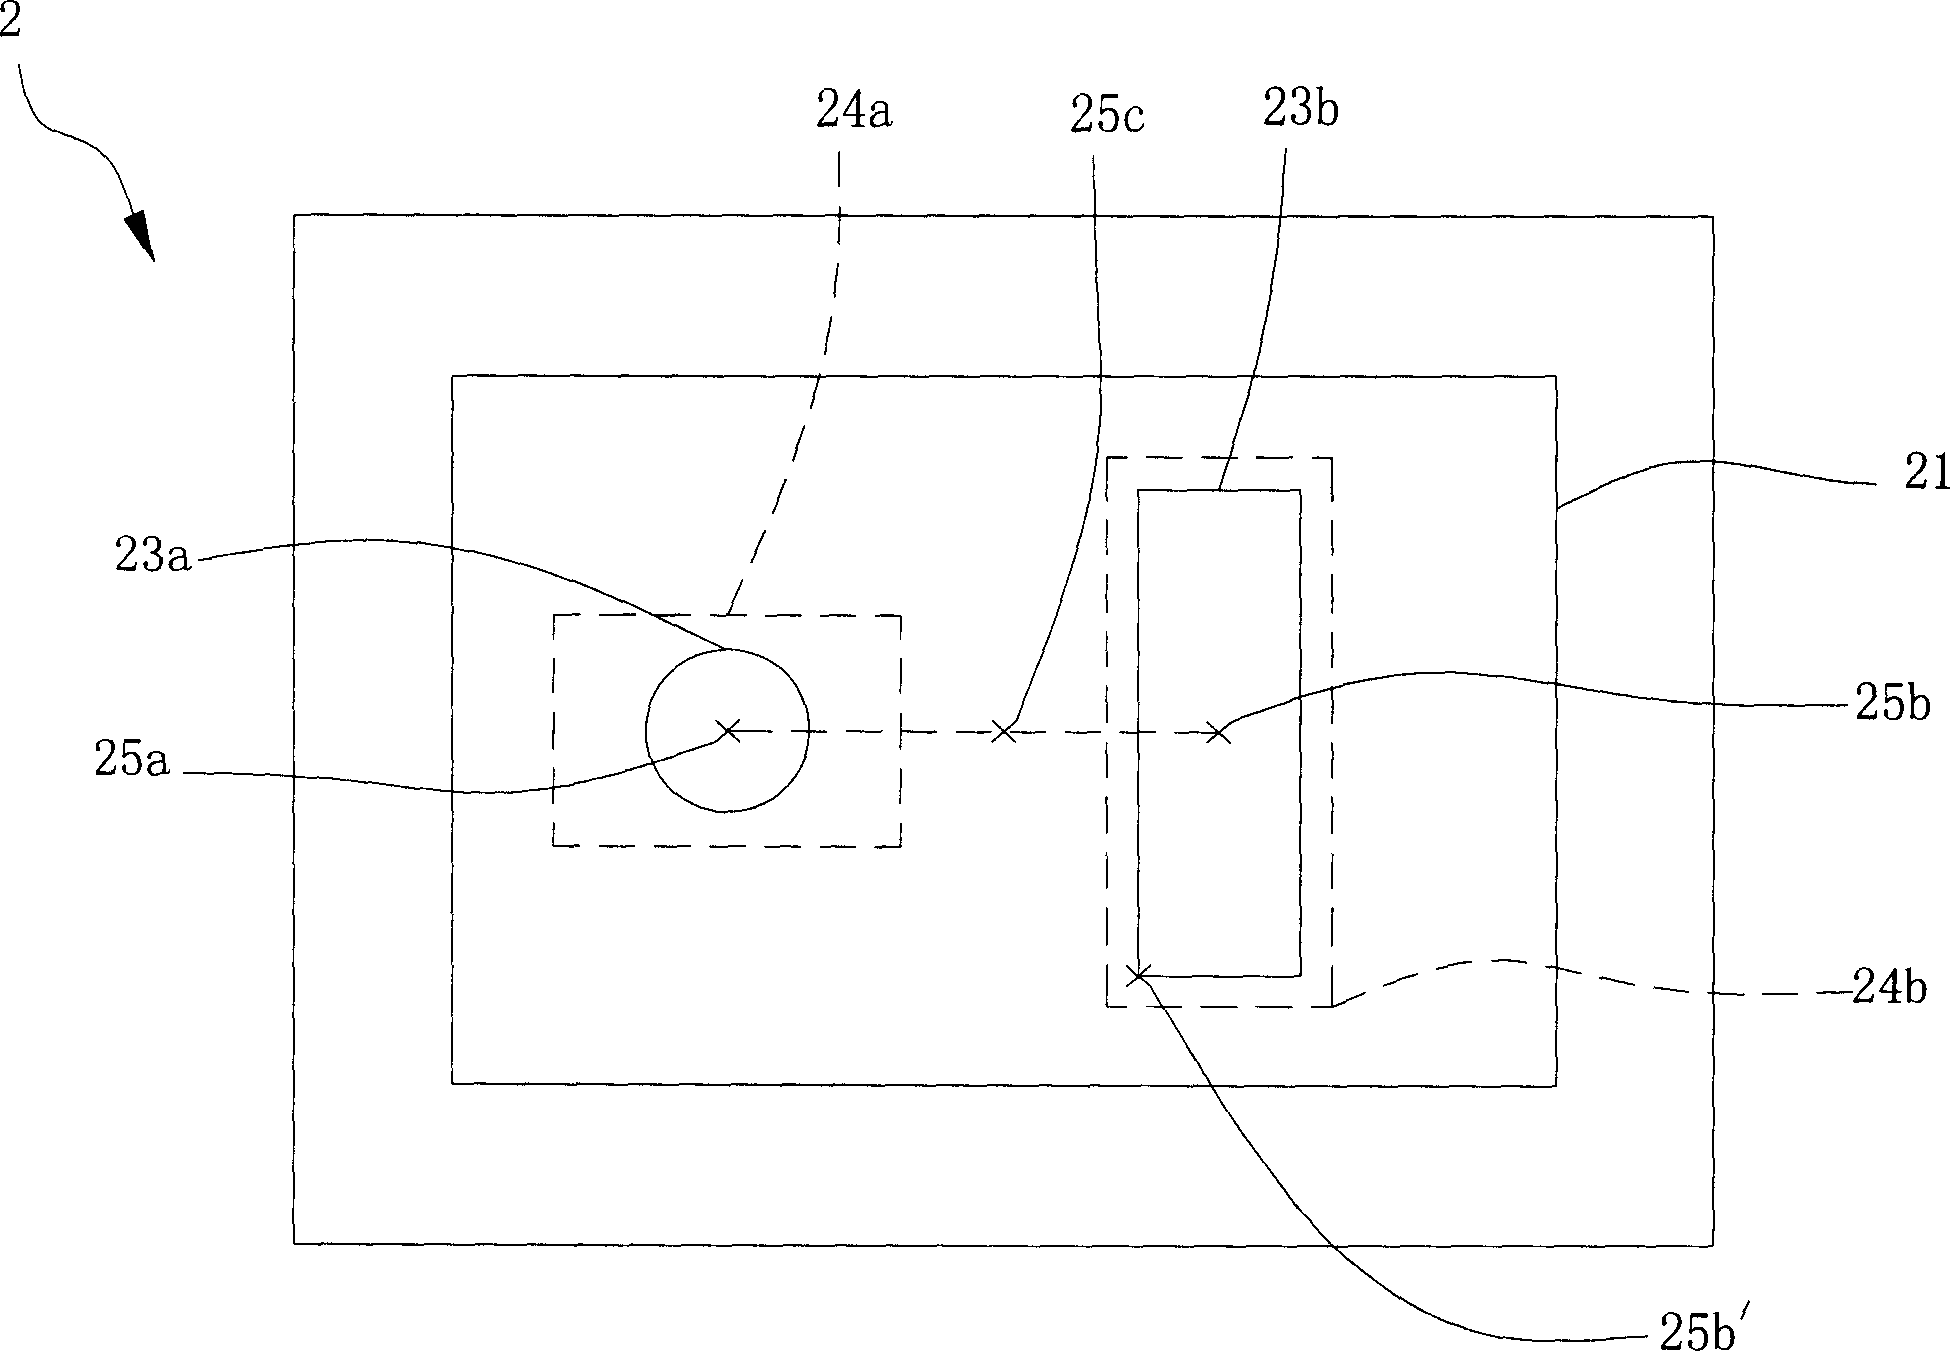 Visual contraposition method of not corresponding basis material